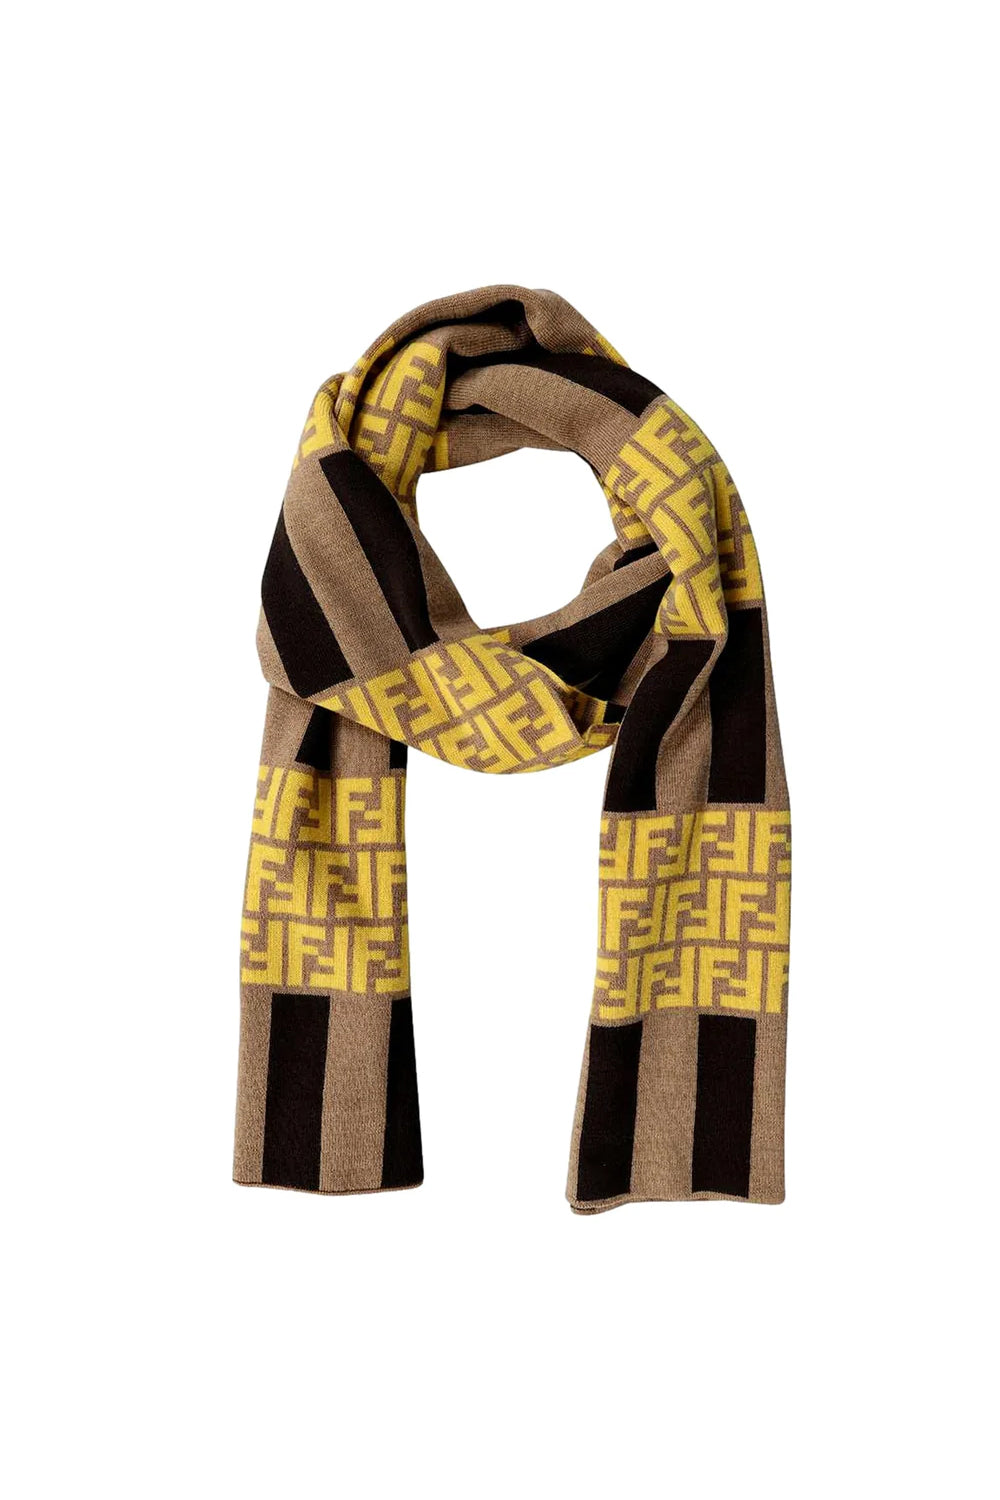 Fendi FF Print Striped Brown and Yellow Knitted Wool Scarf 